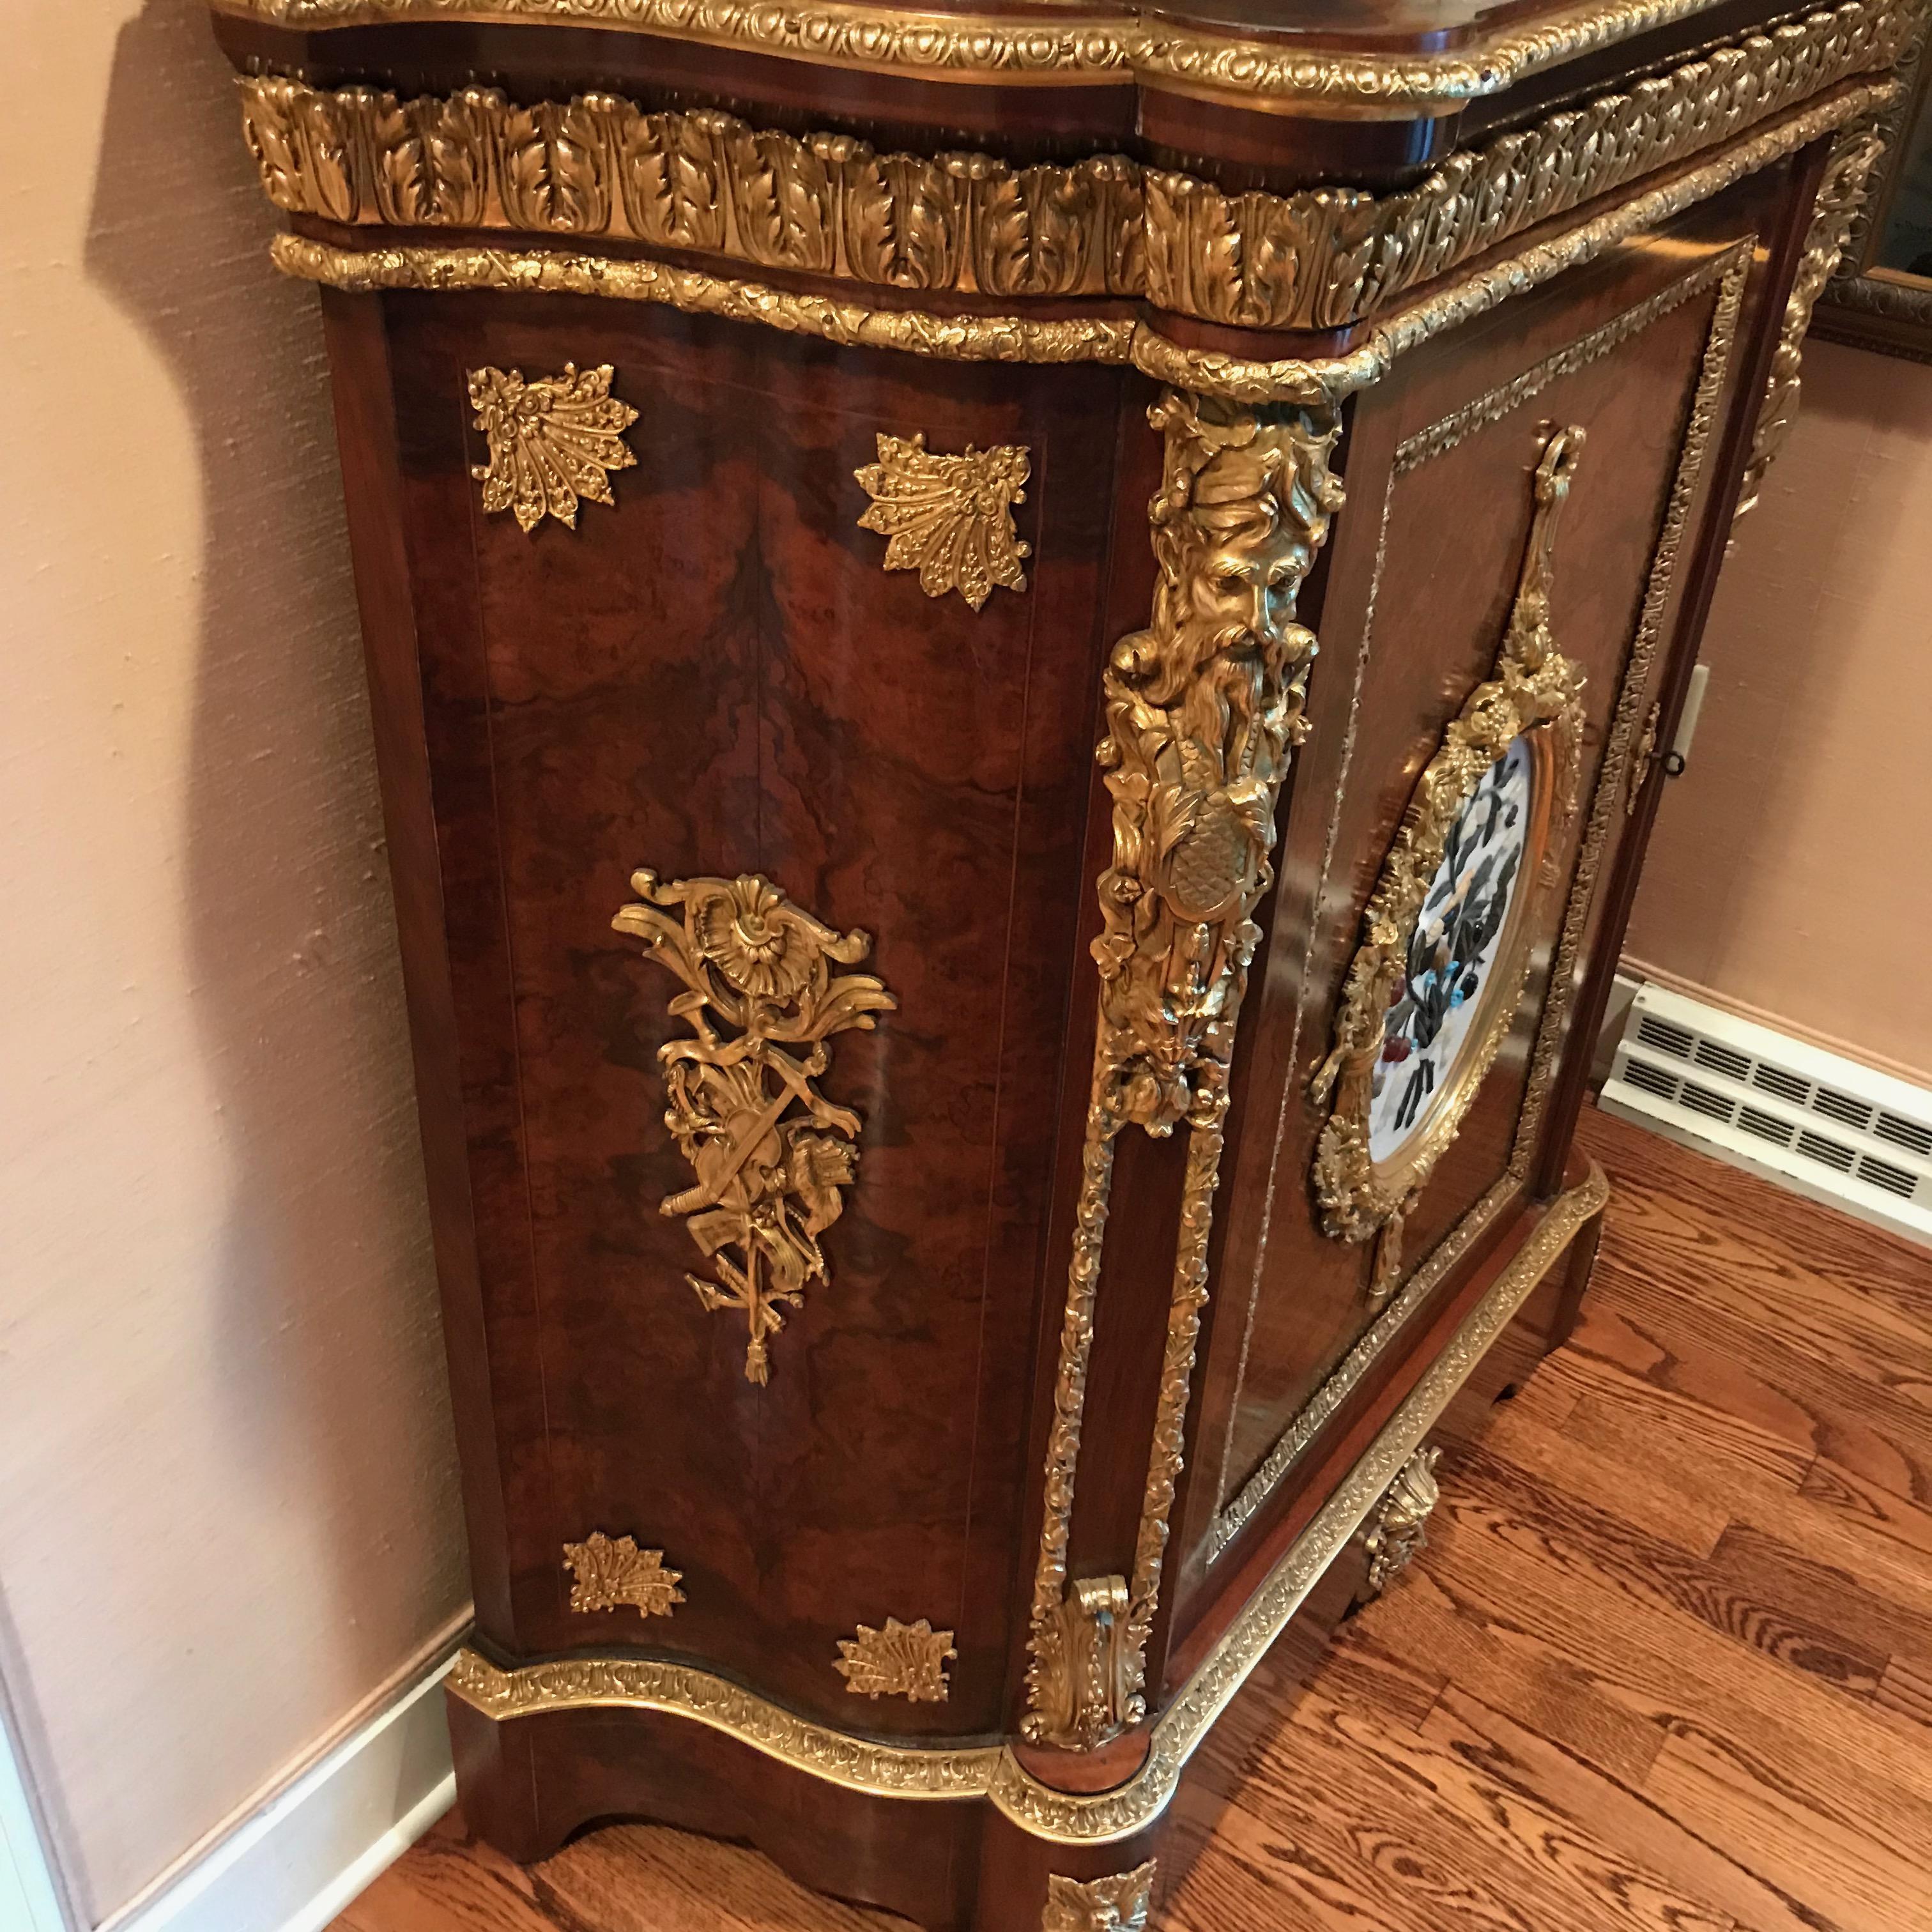 19th Century French Bur Walnut Pier Cabinet In Excellent Condition For Sale In Washington Crossing, PA